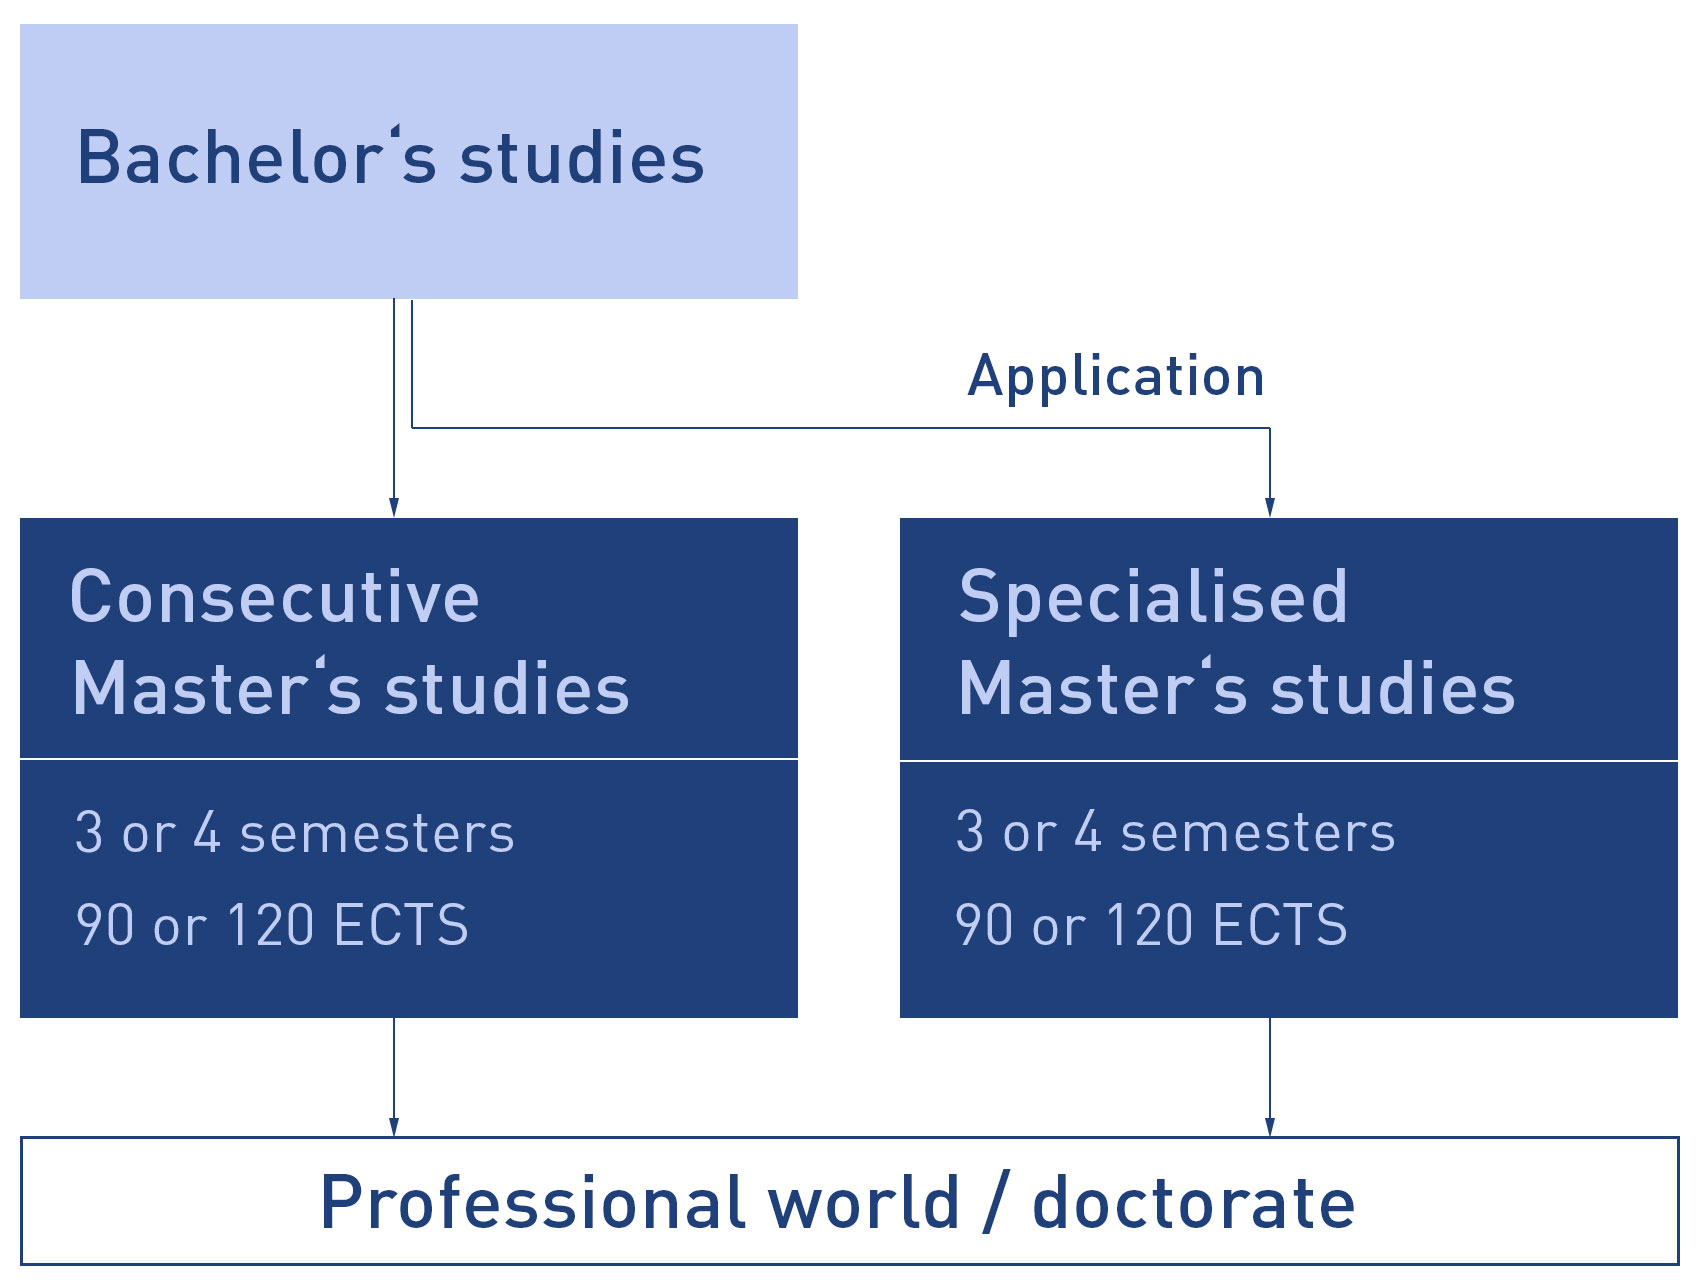 Structure of Master's degree studies